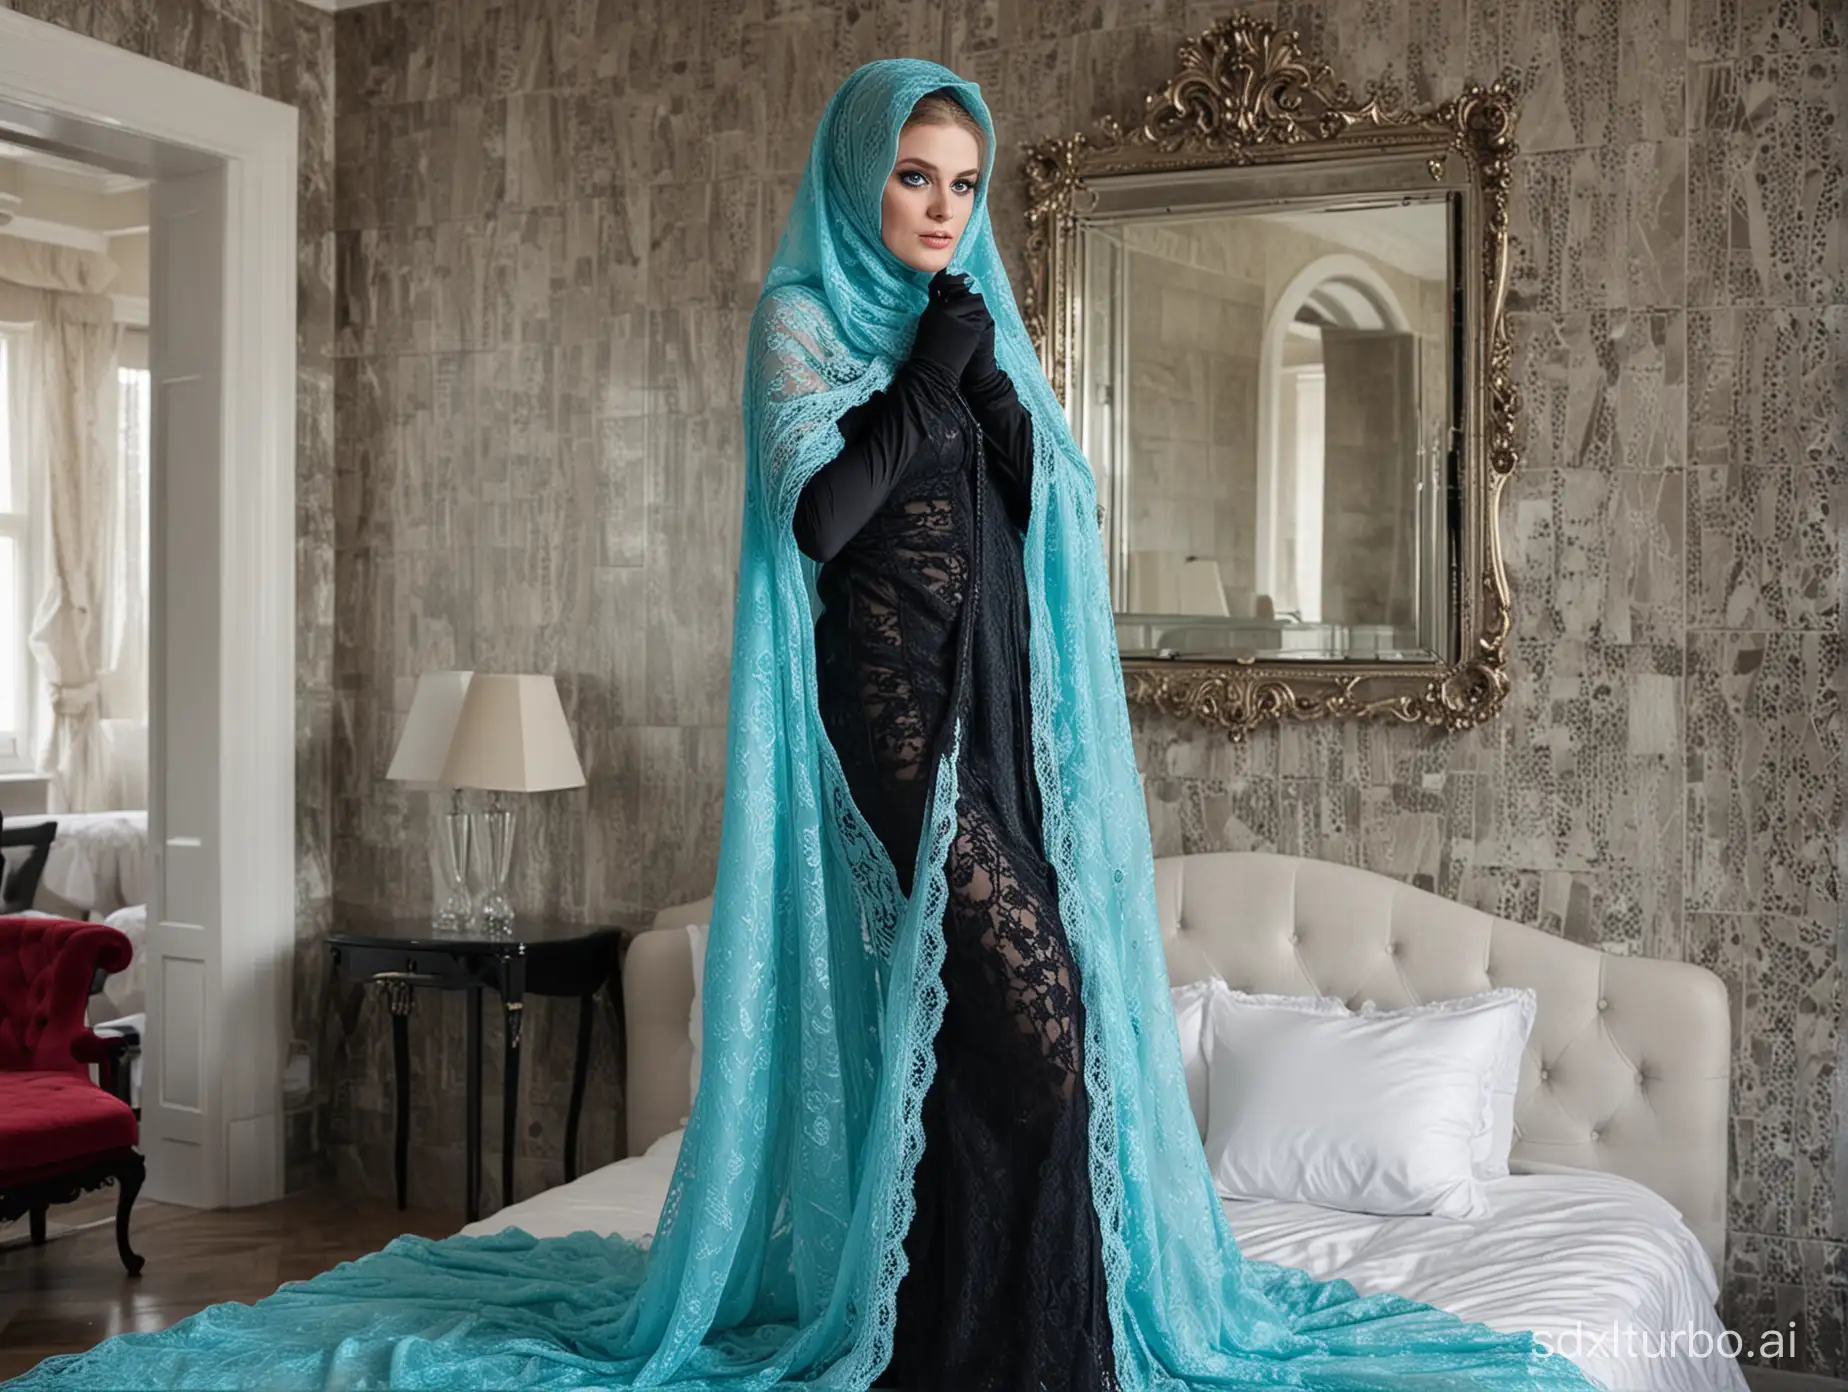 Sissy standing, constrained, blue eyes, fully turquoise burka. Covered head, mask on mouth, head covered with a transparent lace veil, eyes masked. Black gloves. Black high-heeled shoes. Luxury room, marble wall and red satin bed. Mirror in the background.